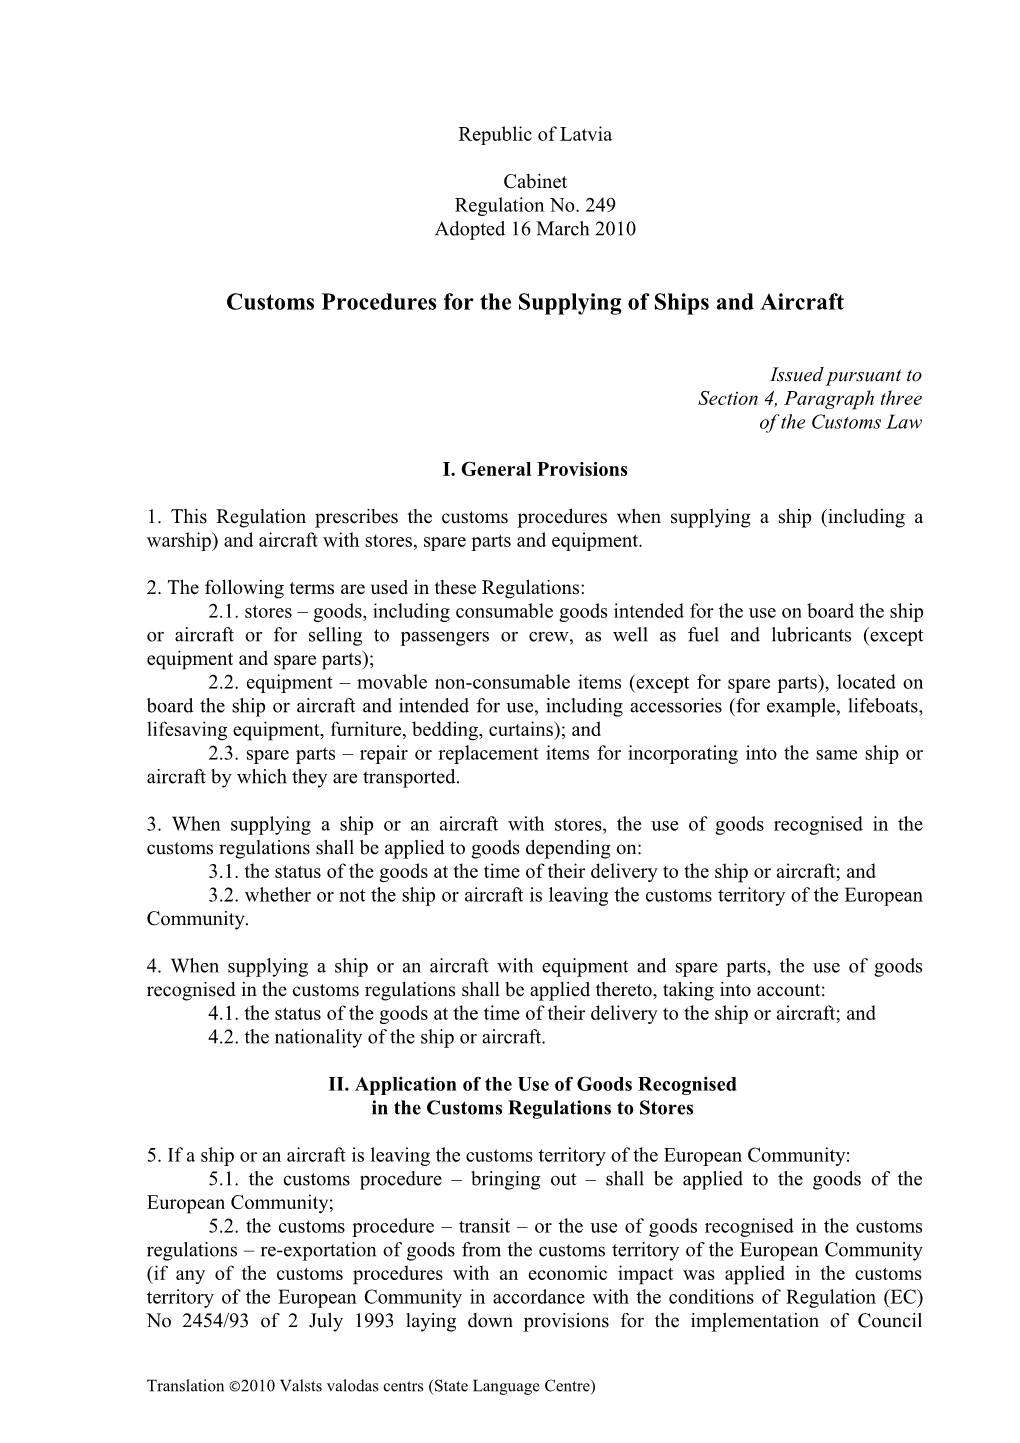 Customs Procedures for the Supplying of Ships and Aircraft